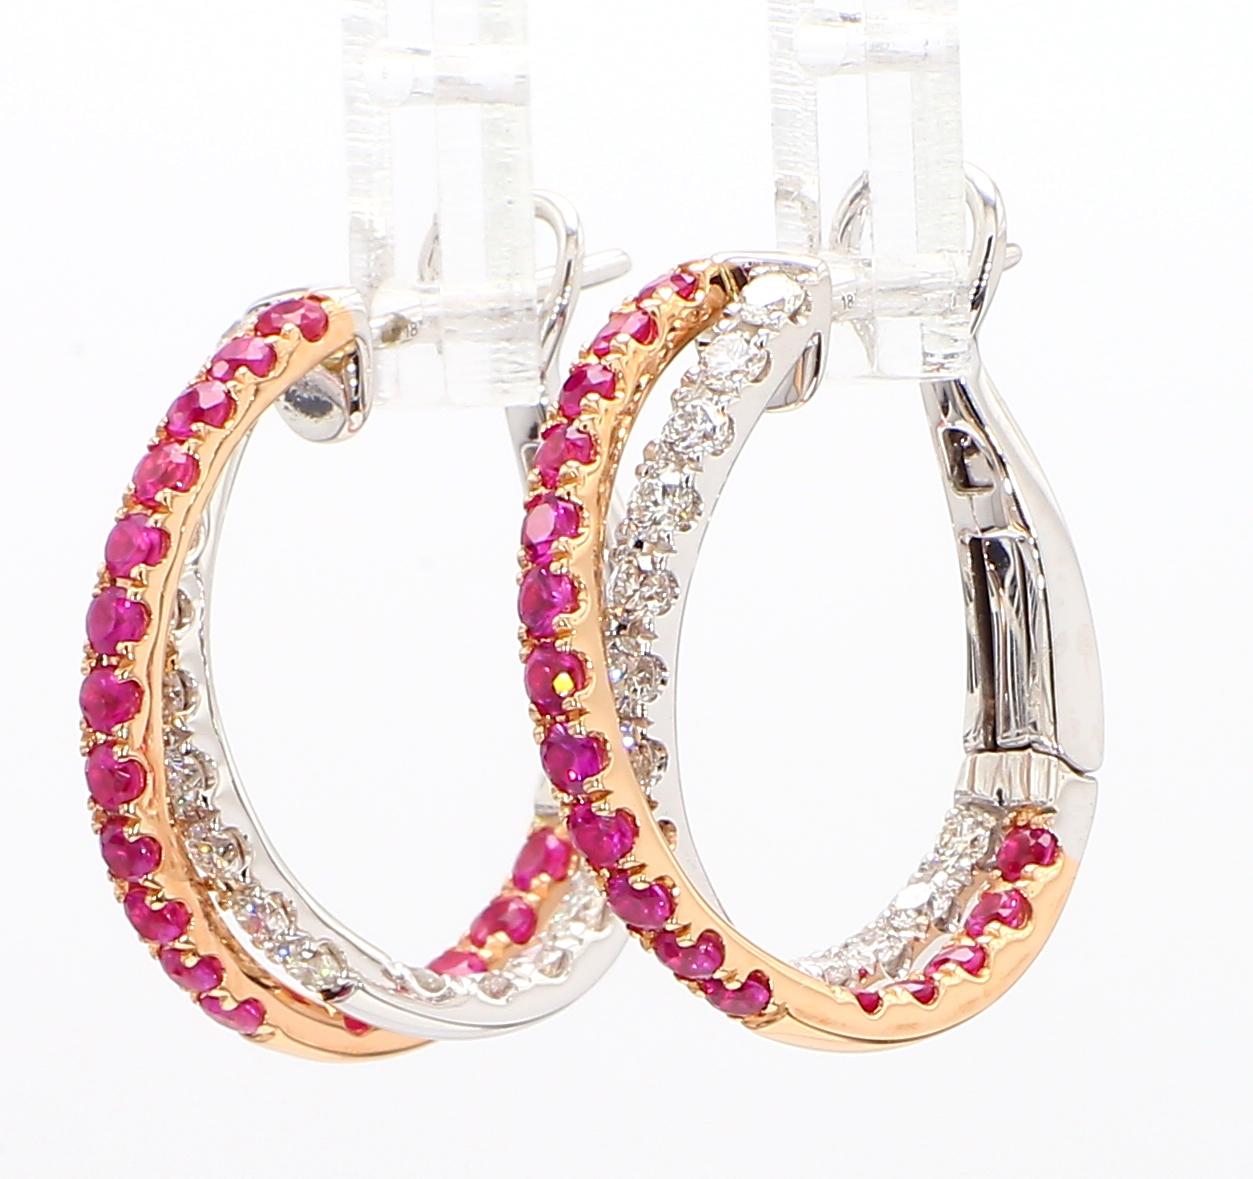 RareGemWorld's classic sapphire earrings. Mounted in a beautiful 18K Rose and White Gold setting with natural round cut pink sapphires. These earrings include both natural round pink sapphires and natural round white diamond melee in a beautiful